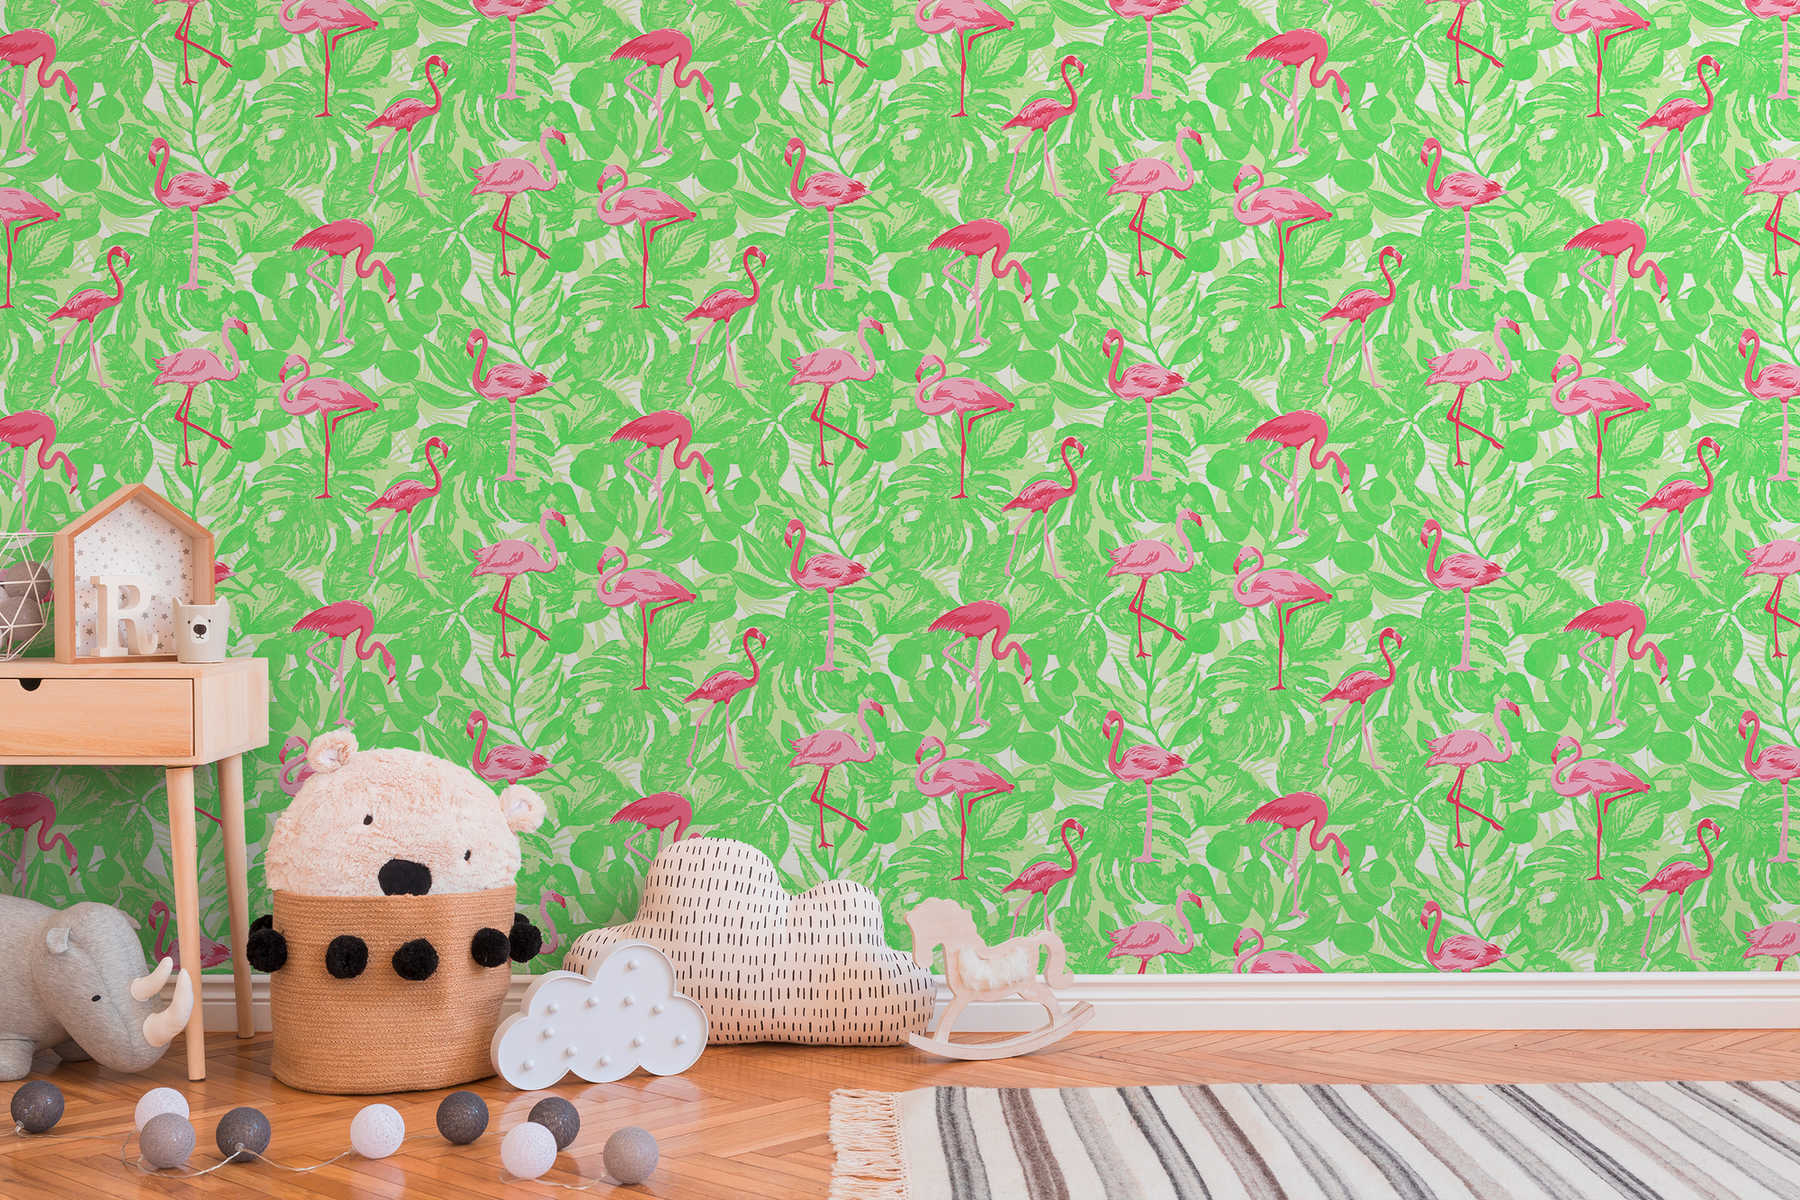             Tropical wallpaper with flamingo & leaves - pink, green
        